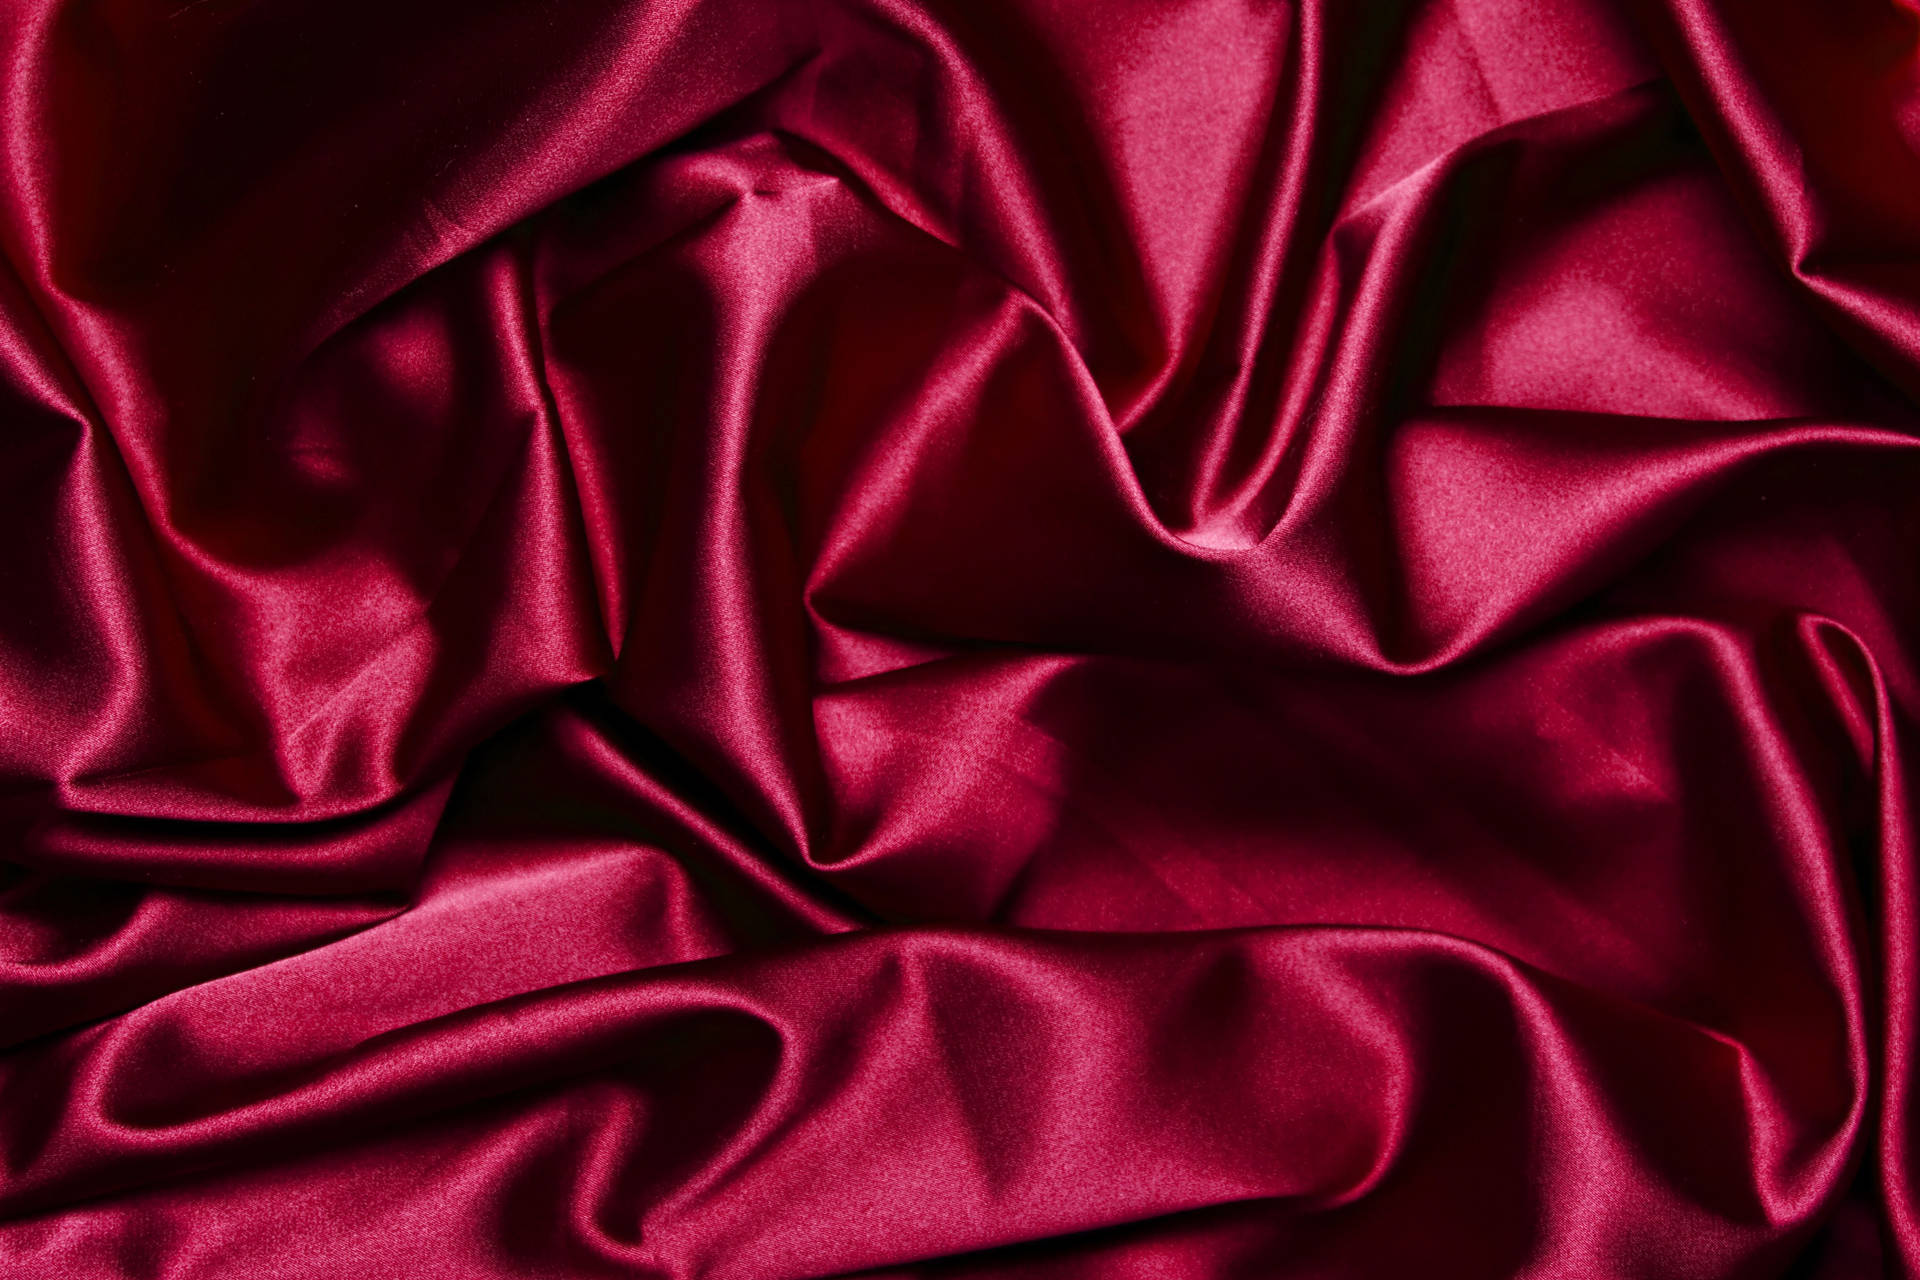 Texture Smooth Red Satin Fabric Background